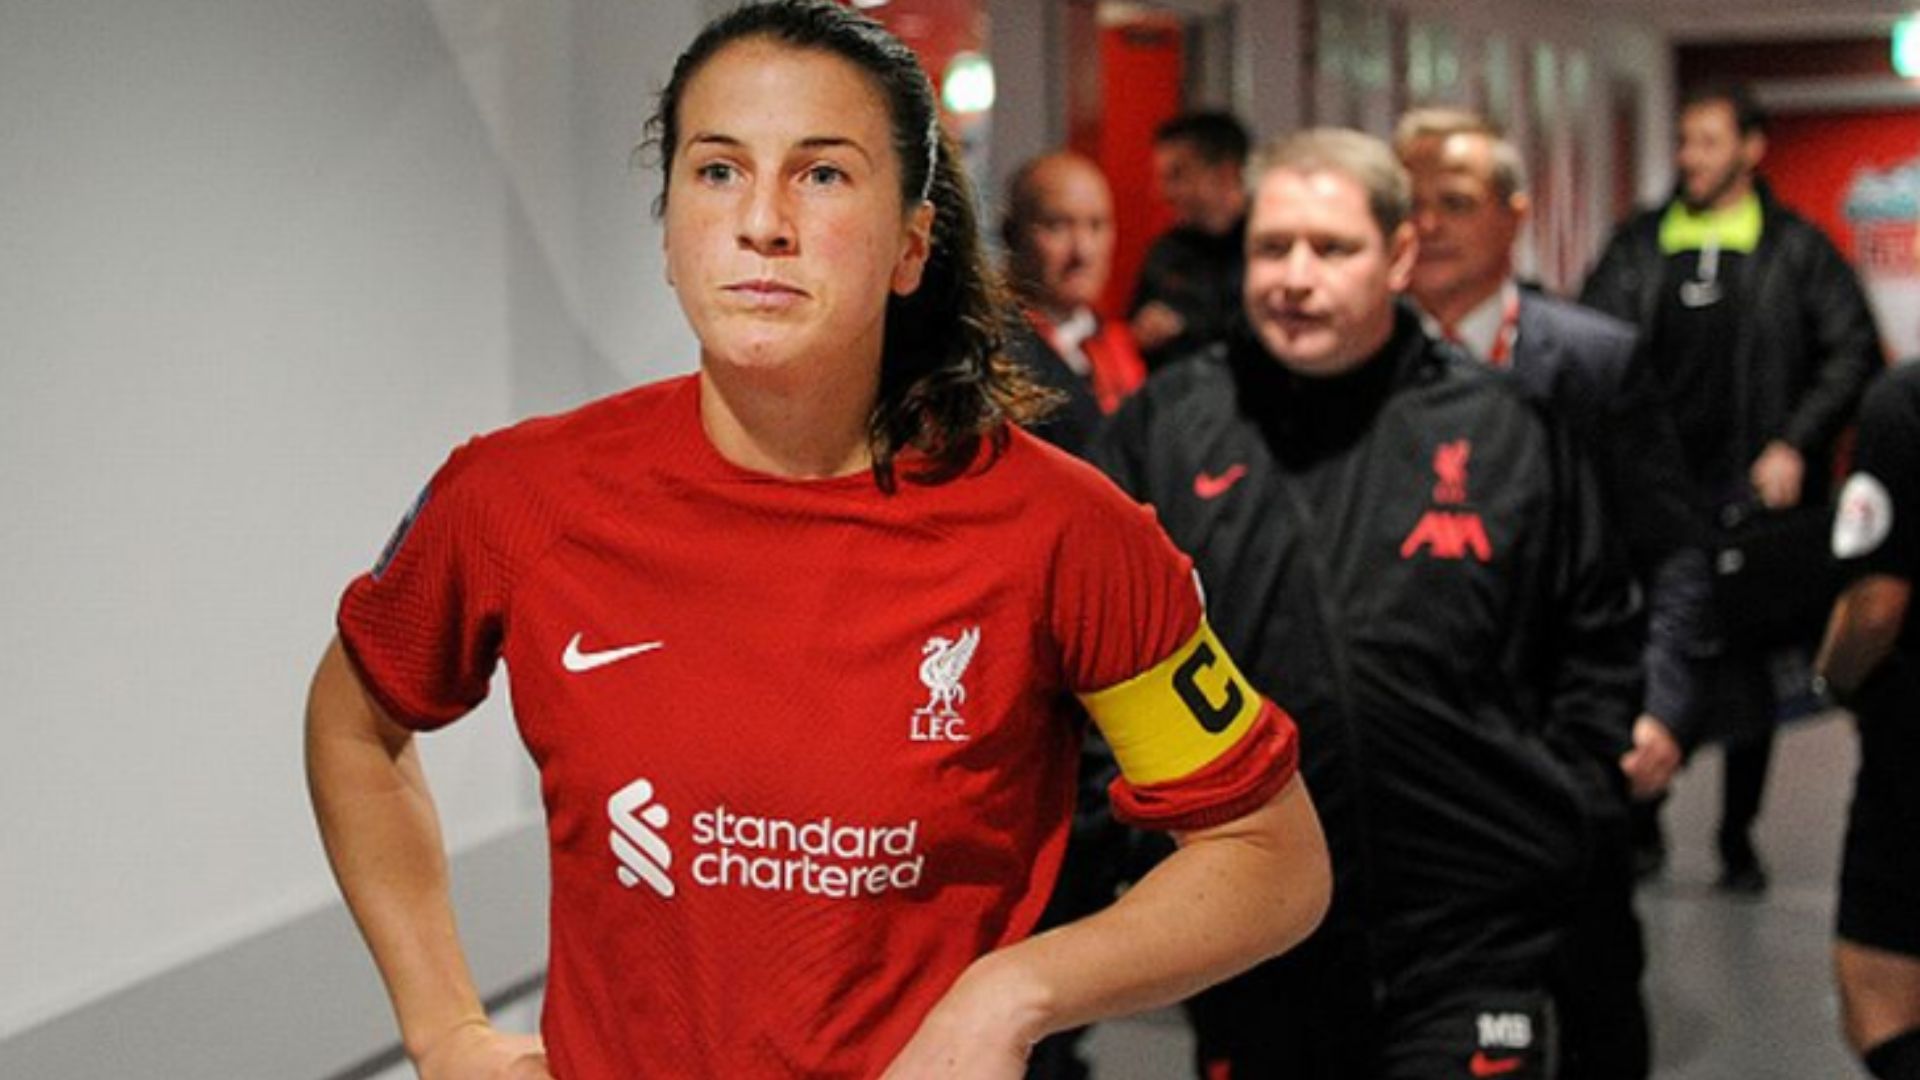 Liverpool out to a stuffed Kop was past Niamh Faheys fantasies